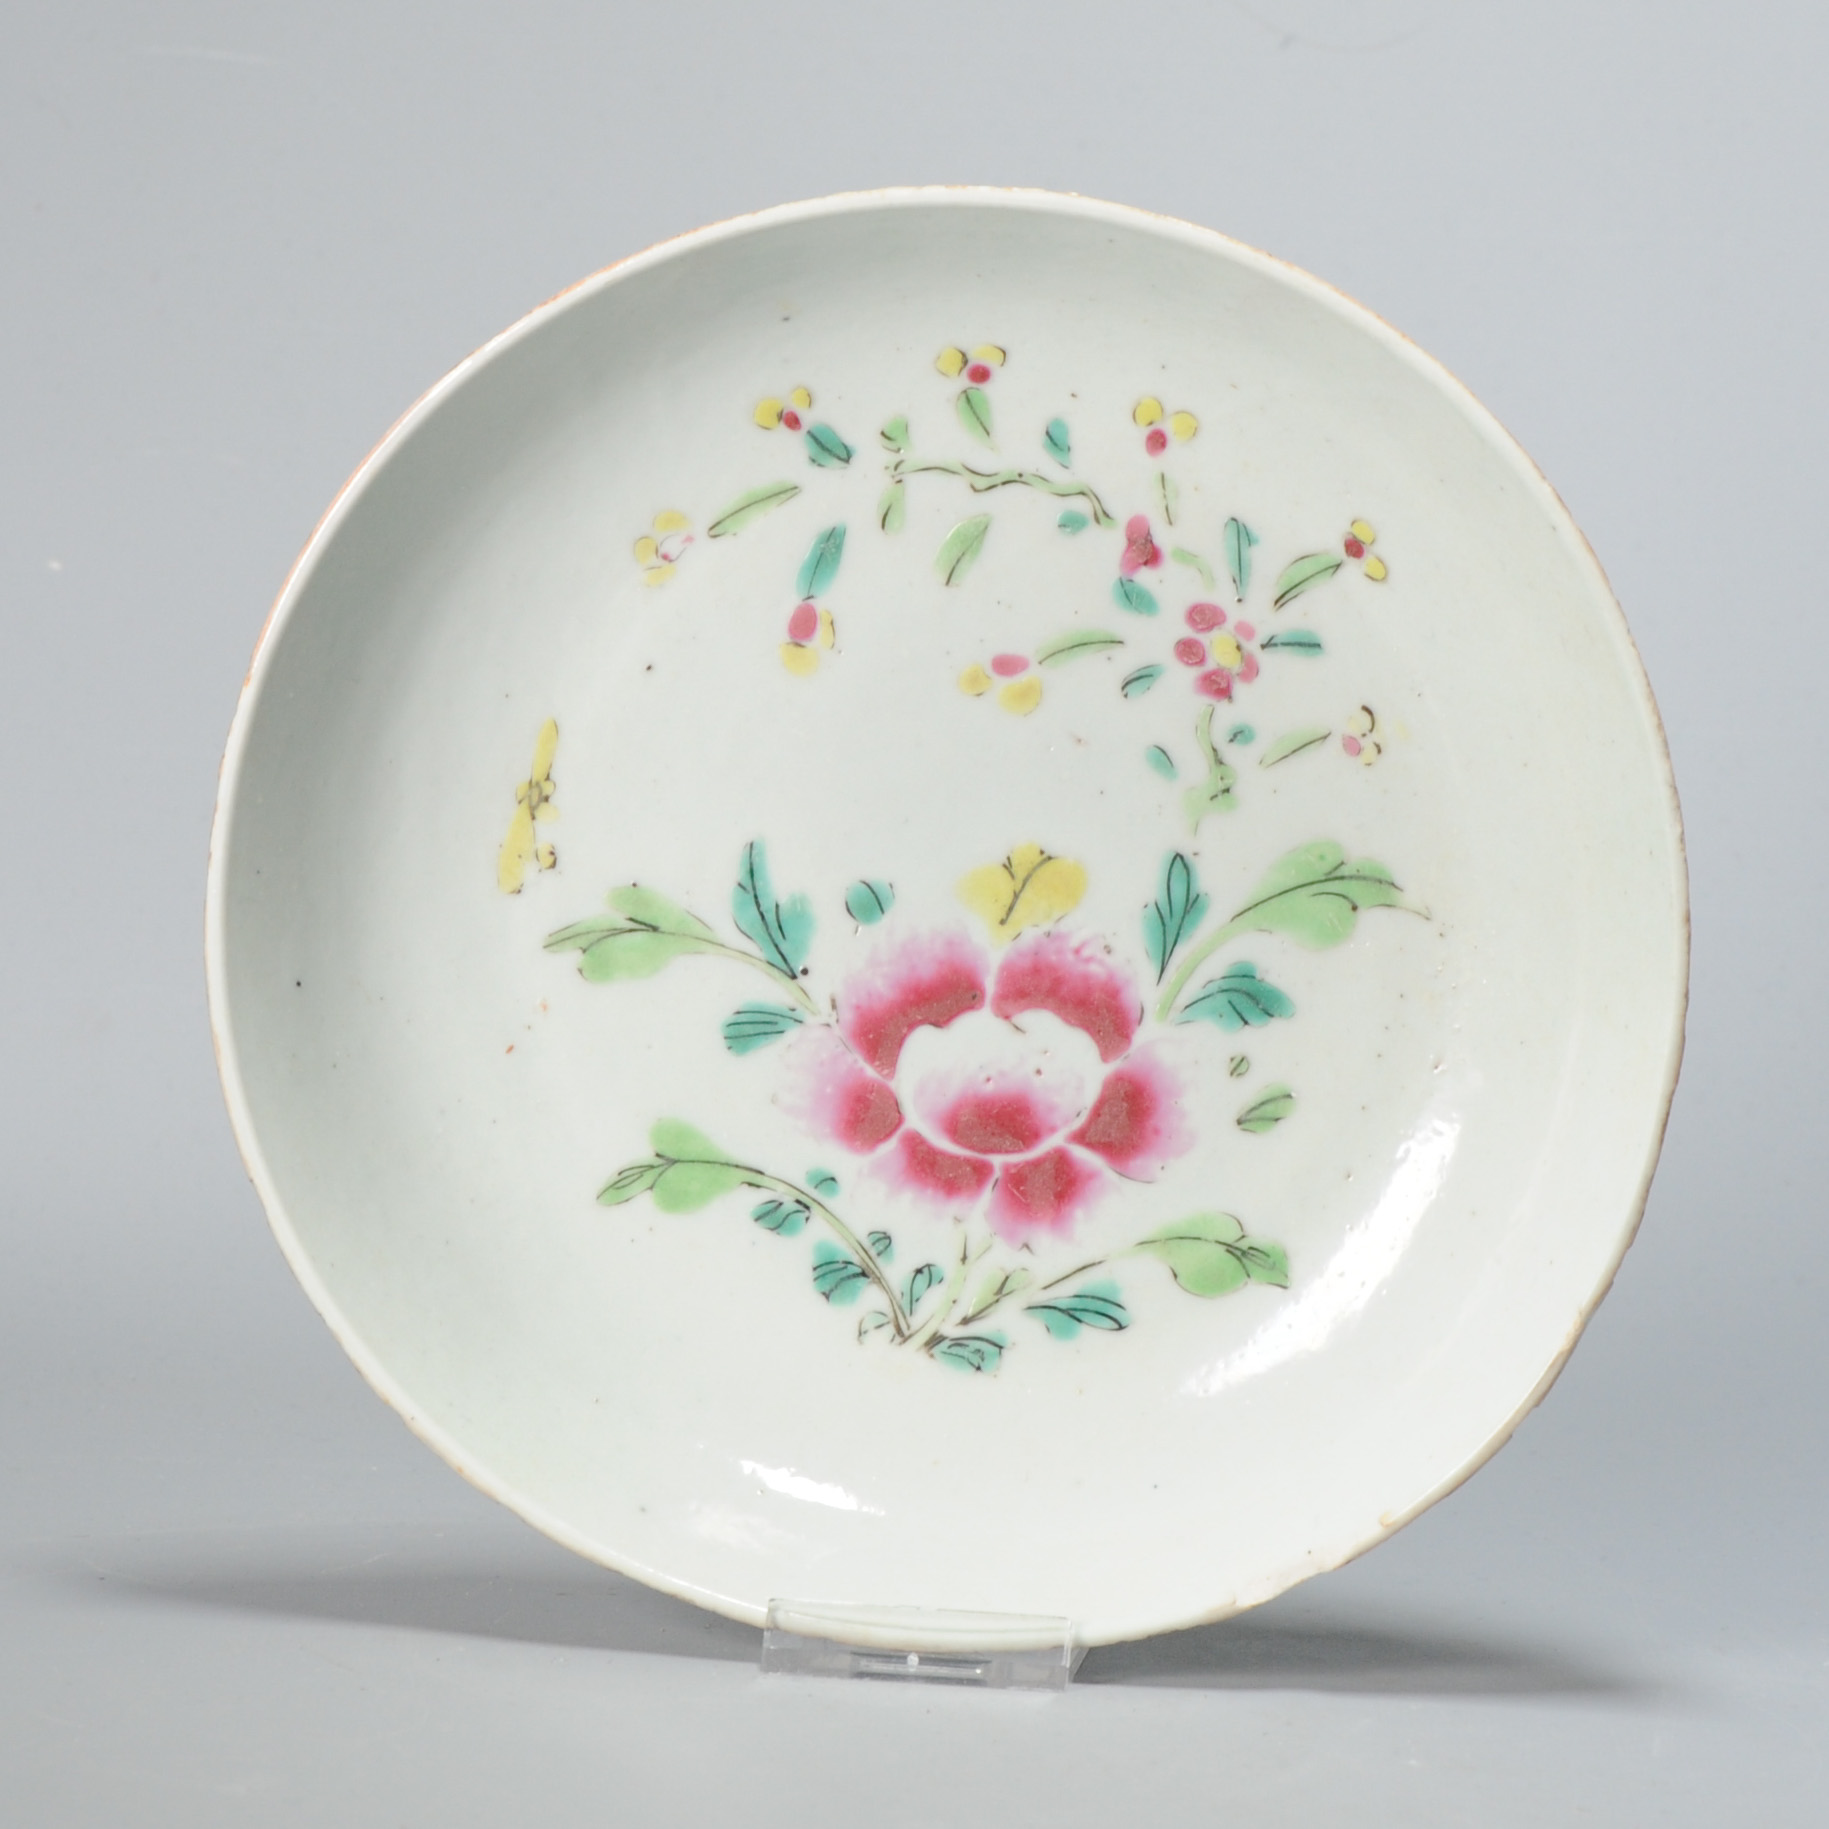 0971 Lovely Famille Rose Plate with Flowers Qianlong Period (1736-1795)